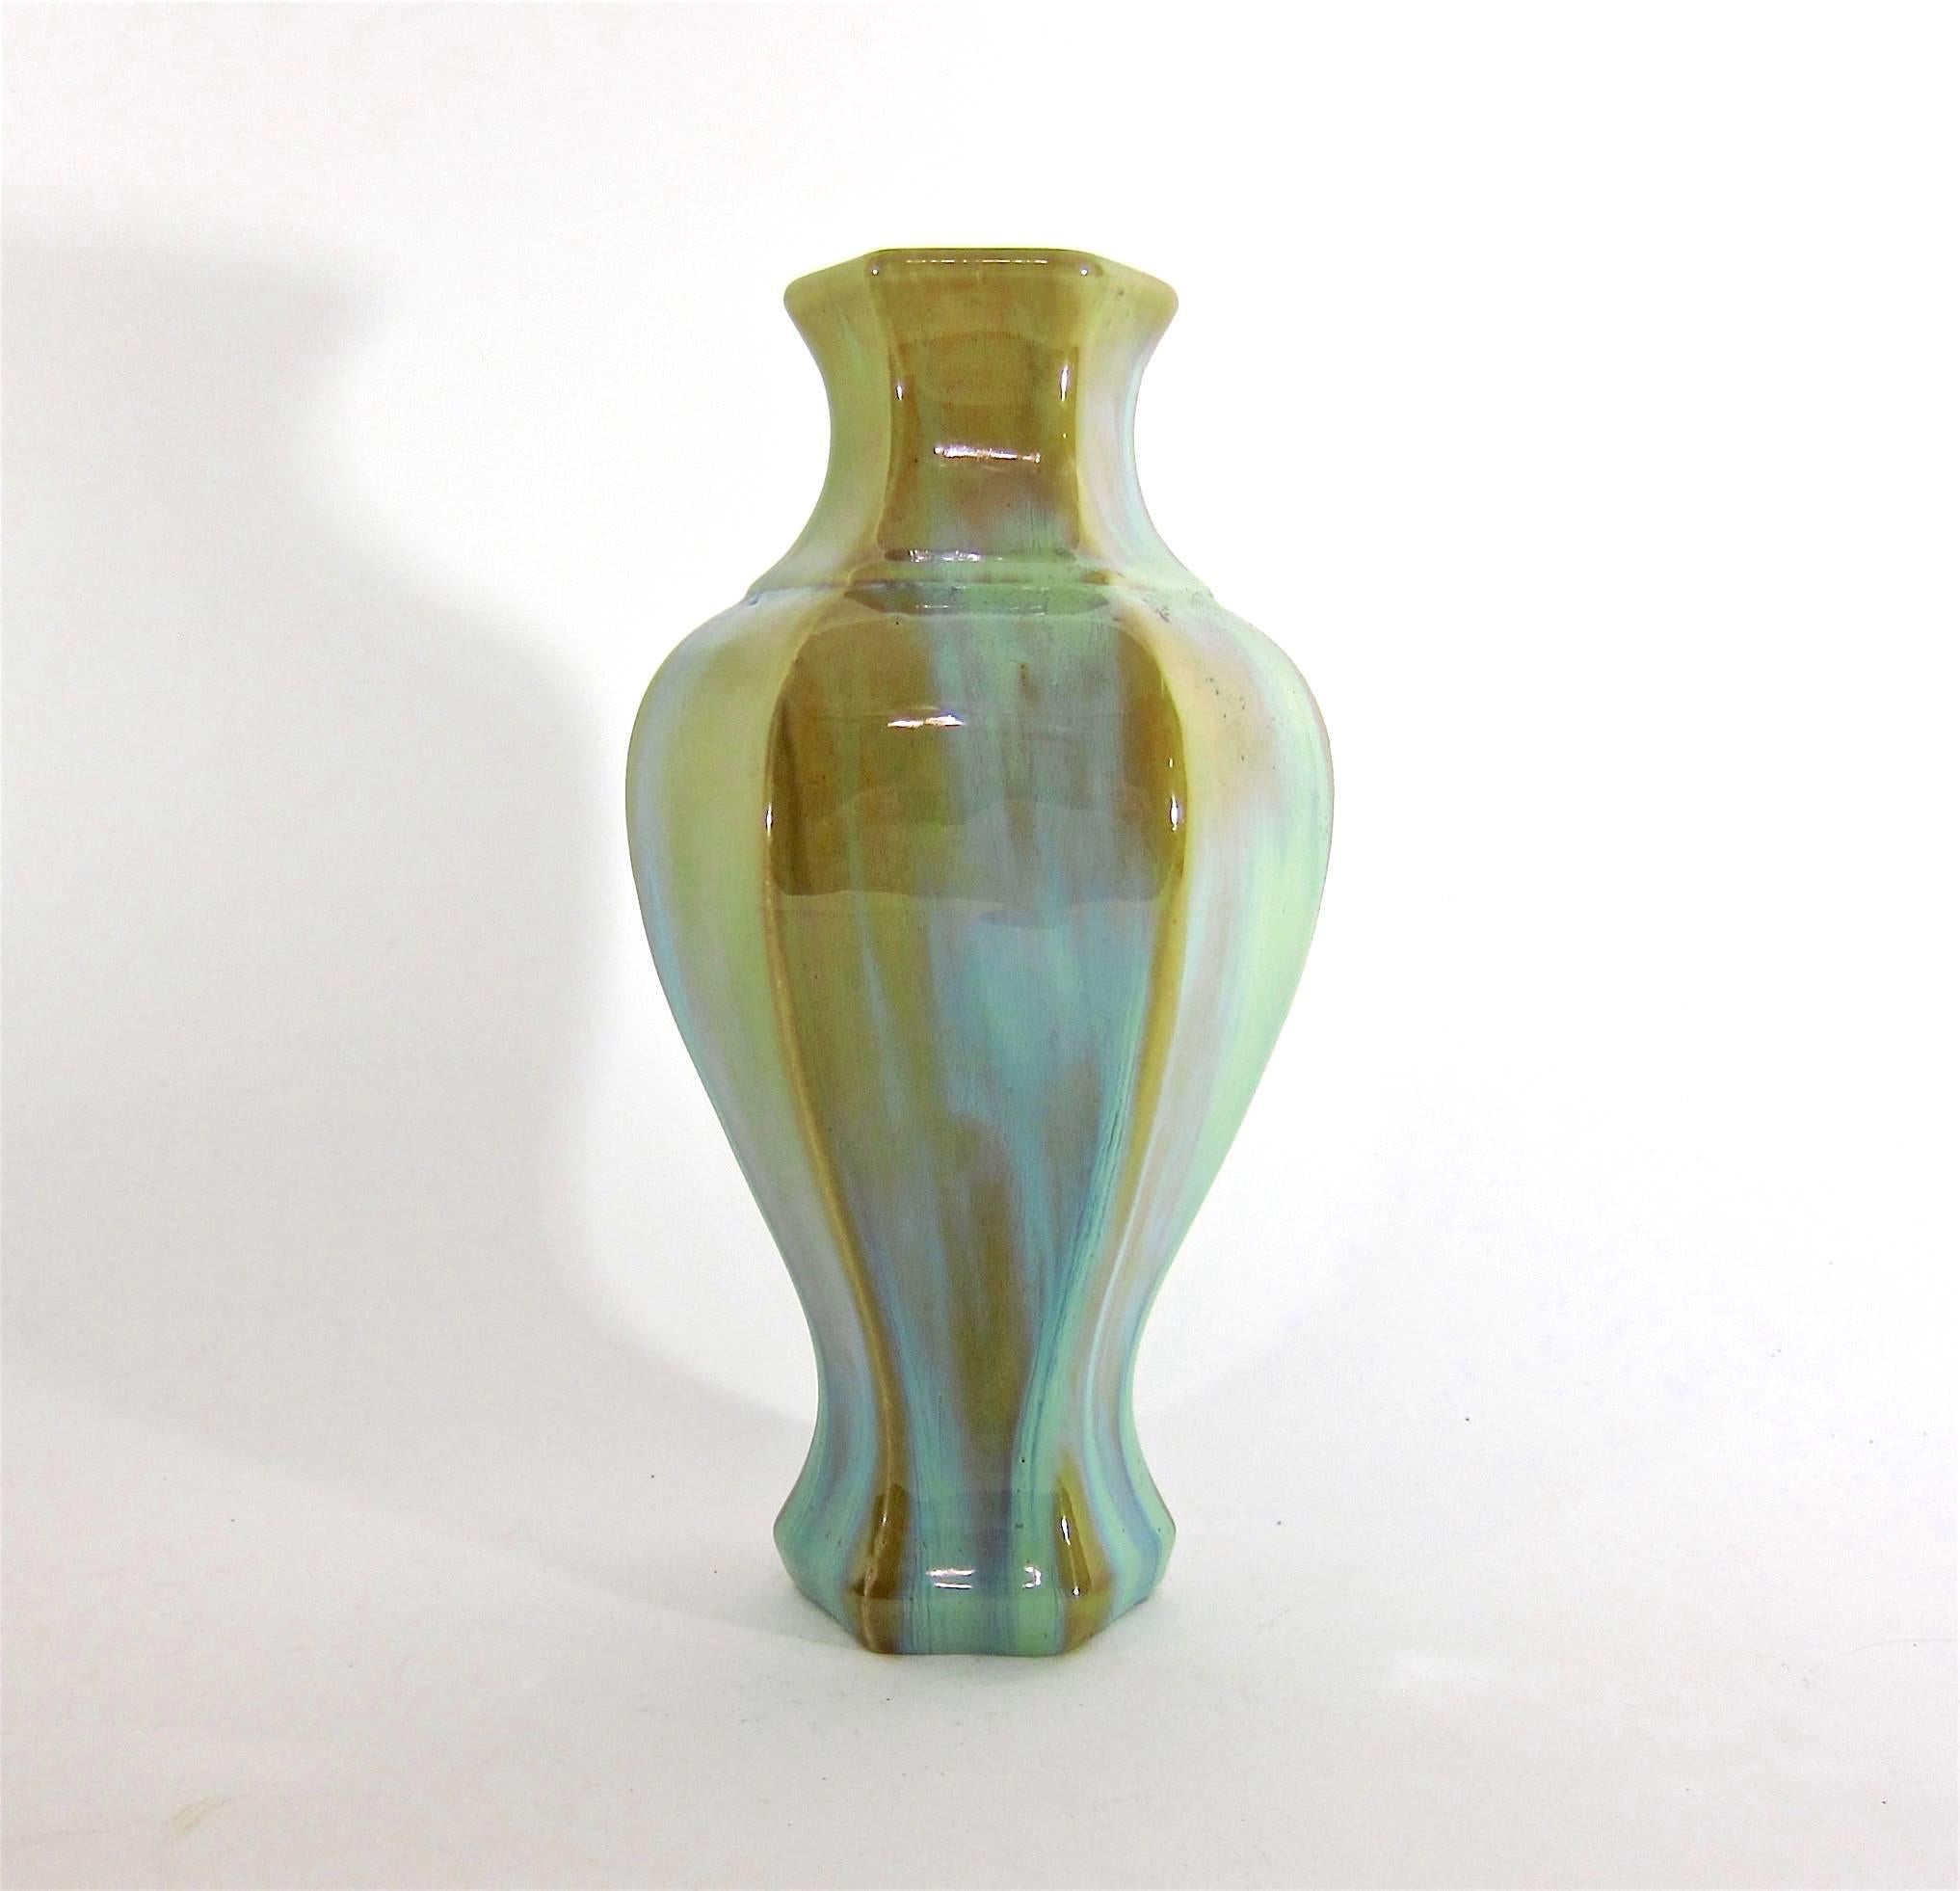 20th Century Vintage Arts and Crafts Fulper Pottery Vase with Green Flambe Glaze, circa 1920s